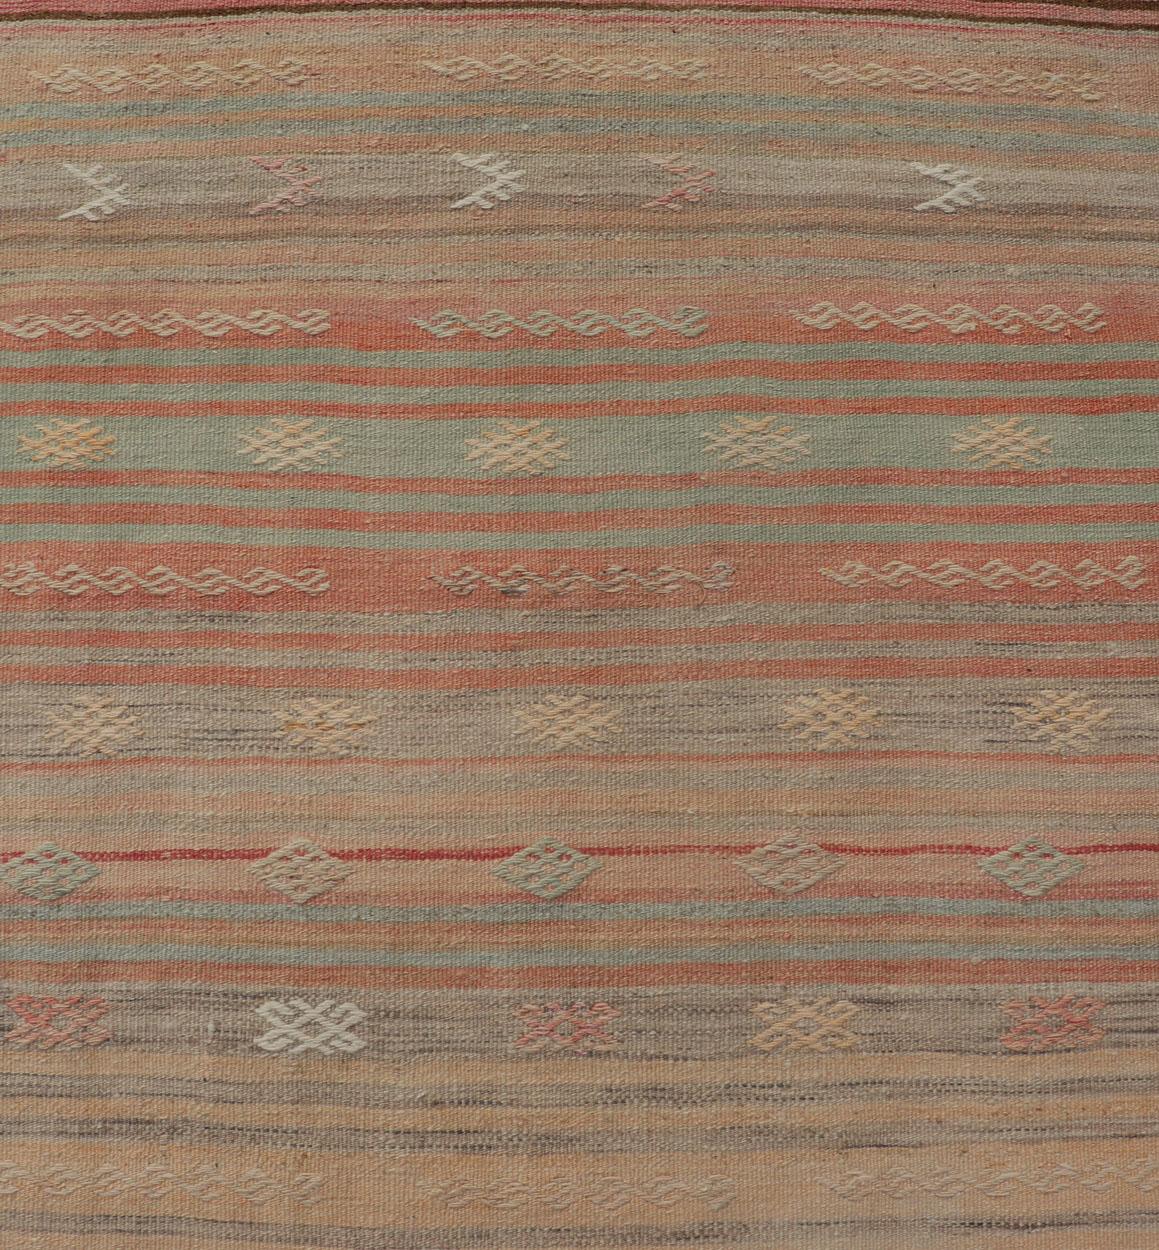 Vintage Kilim runner with stripes and geometric Tribal motifs in light tones. Keivan Woven Arts / rug EN-P13732, country of origin / type: Turkey / Kilim, circa mid-20th century.

This vintage flat-woven kilim runner features a minimalist design